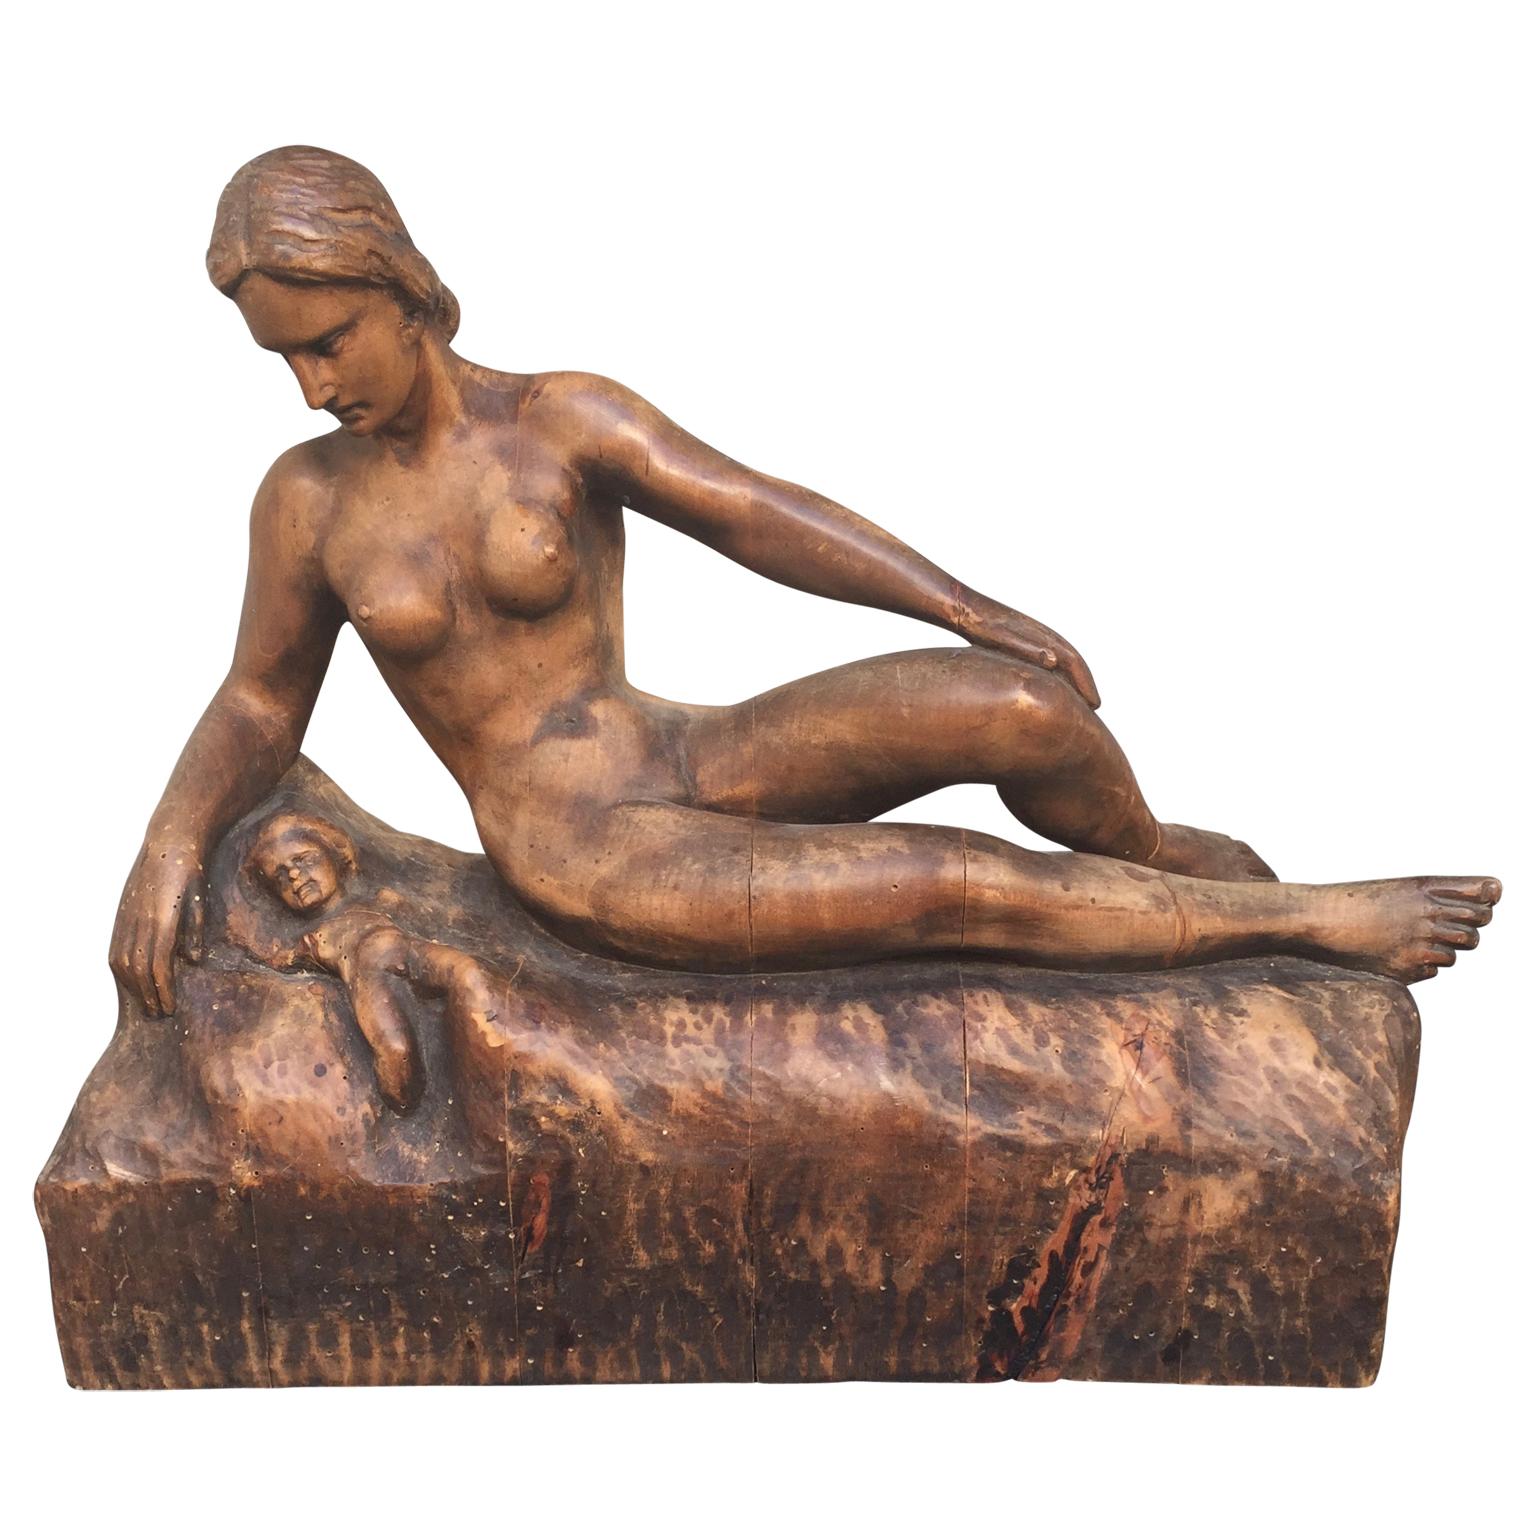 Artistically significant hand carved sculpture of nude mother and child, completed during the Second World War.